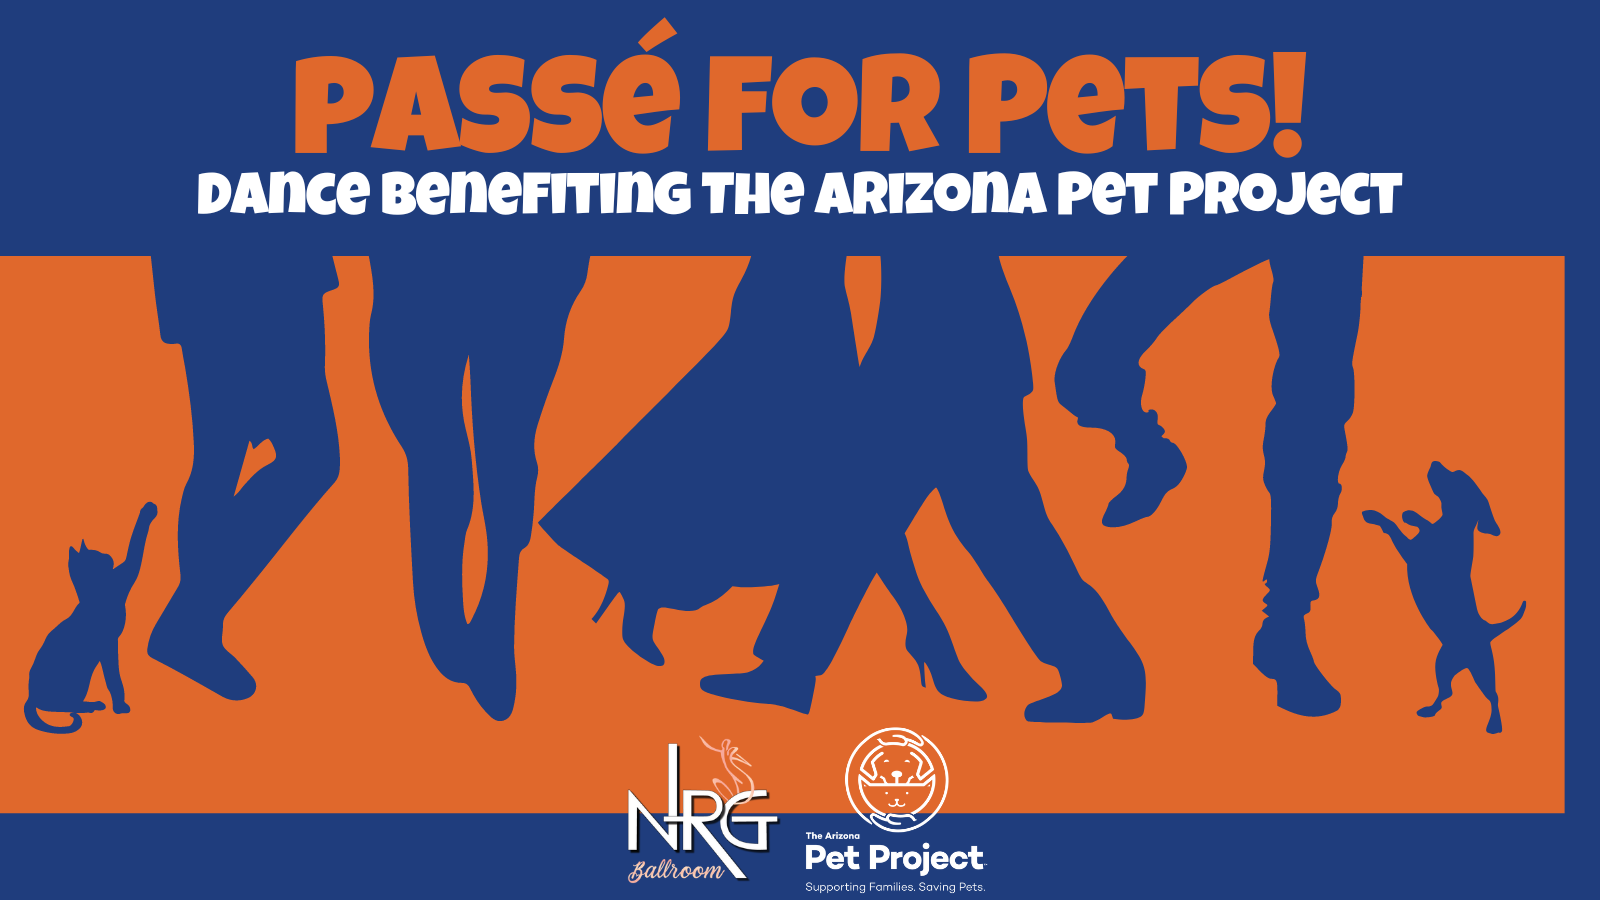 Passe for Pets Dance Event Benefiting The Arizona Pet Project